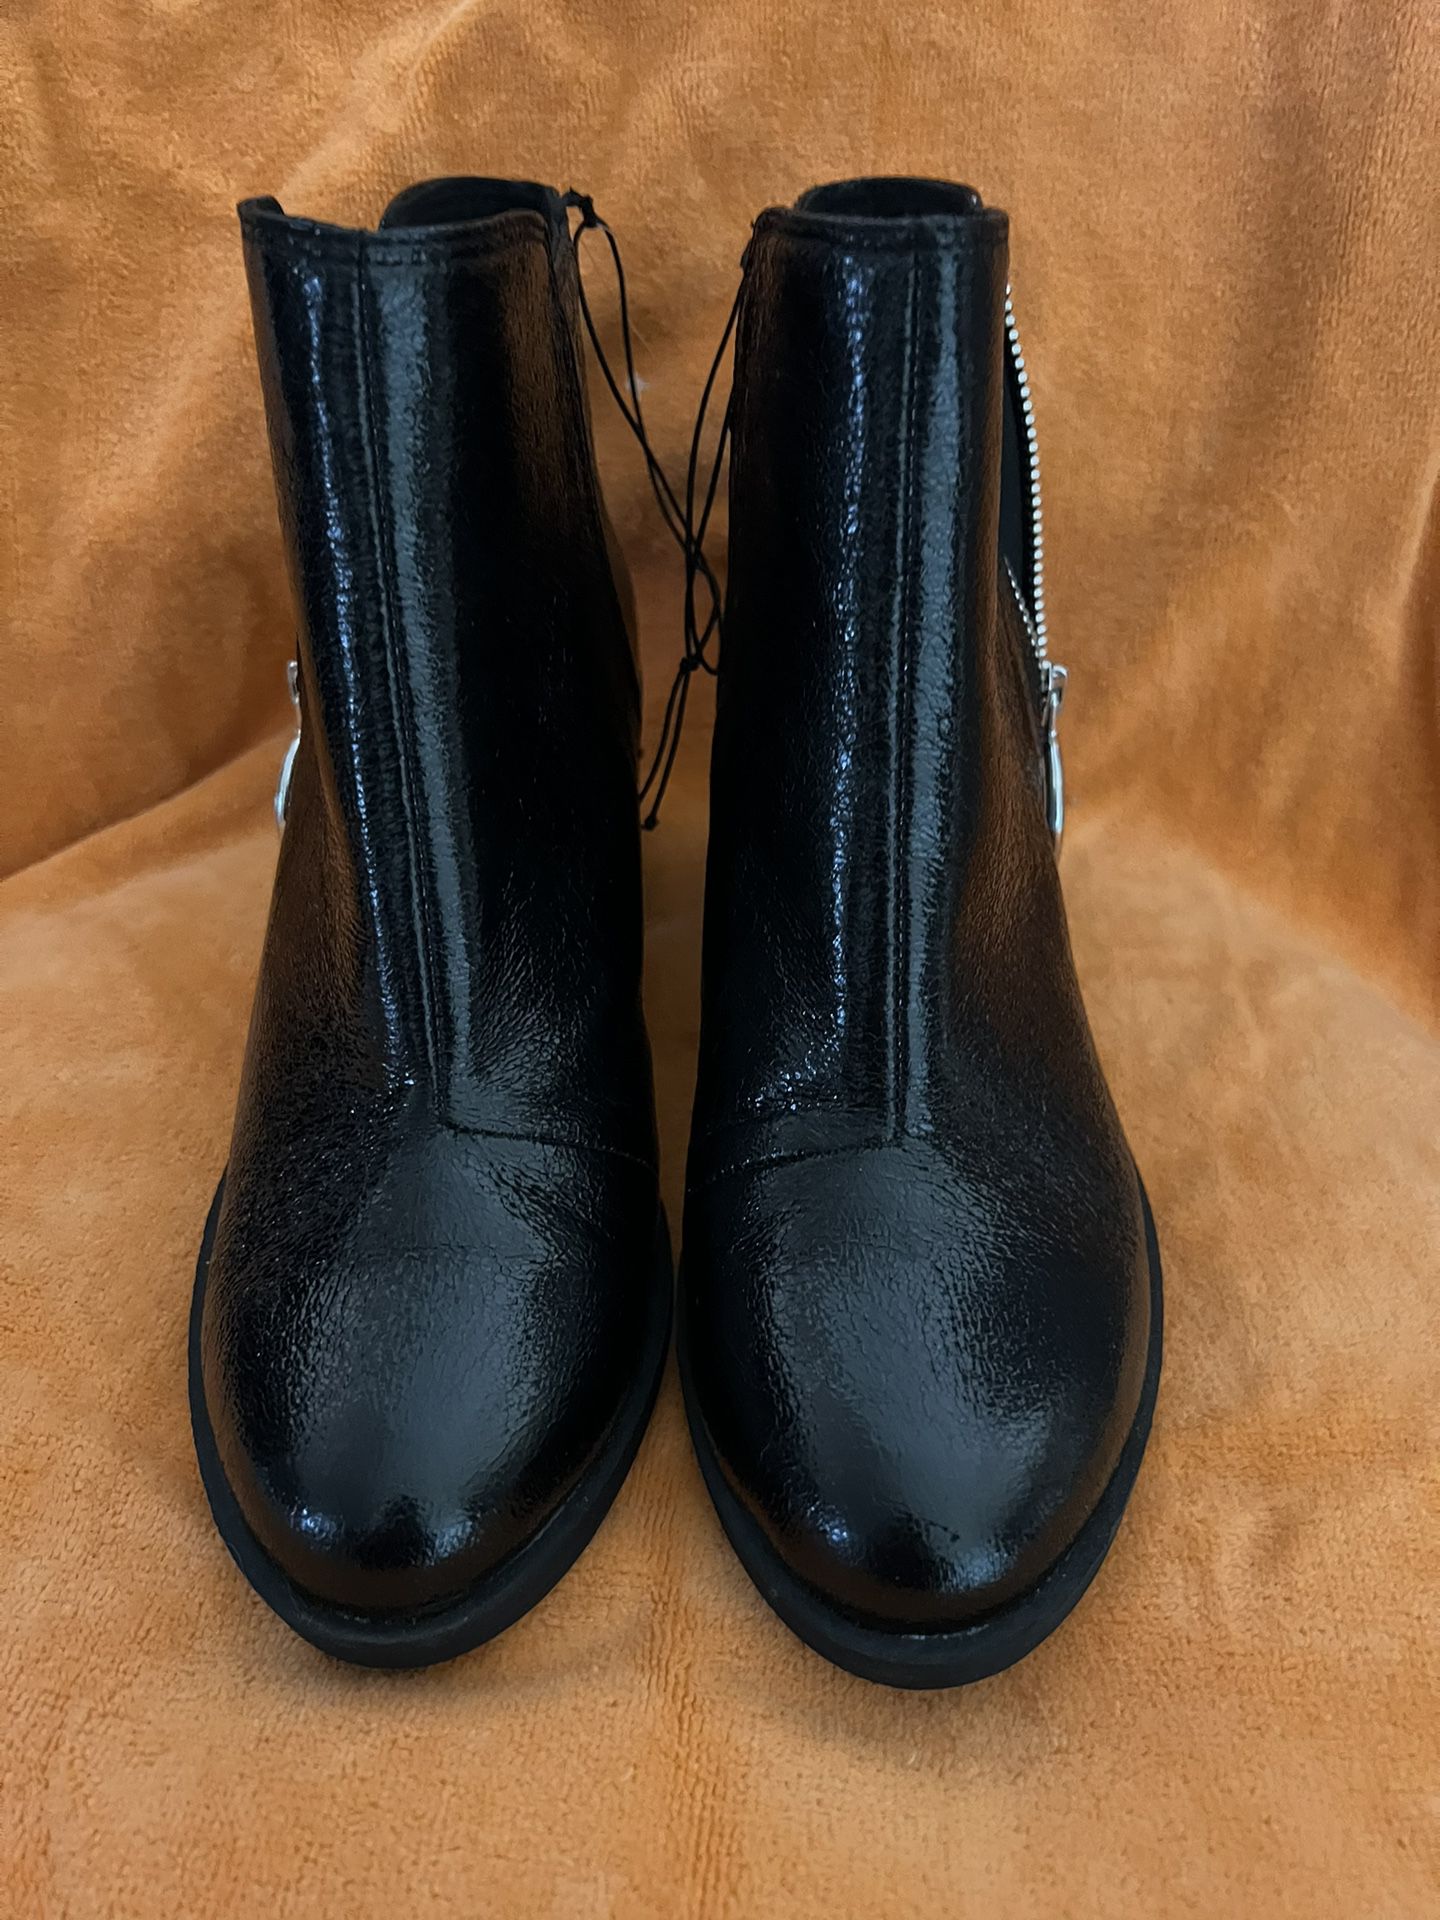 New H & M “Divided Womens Boots